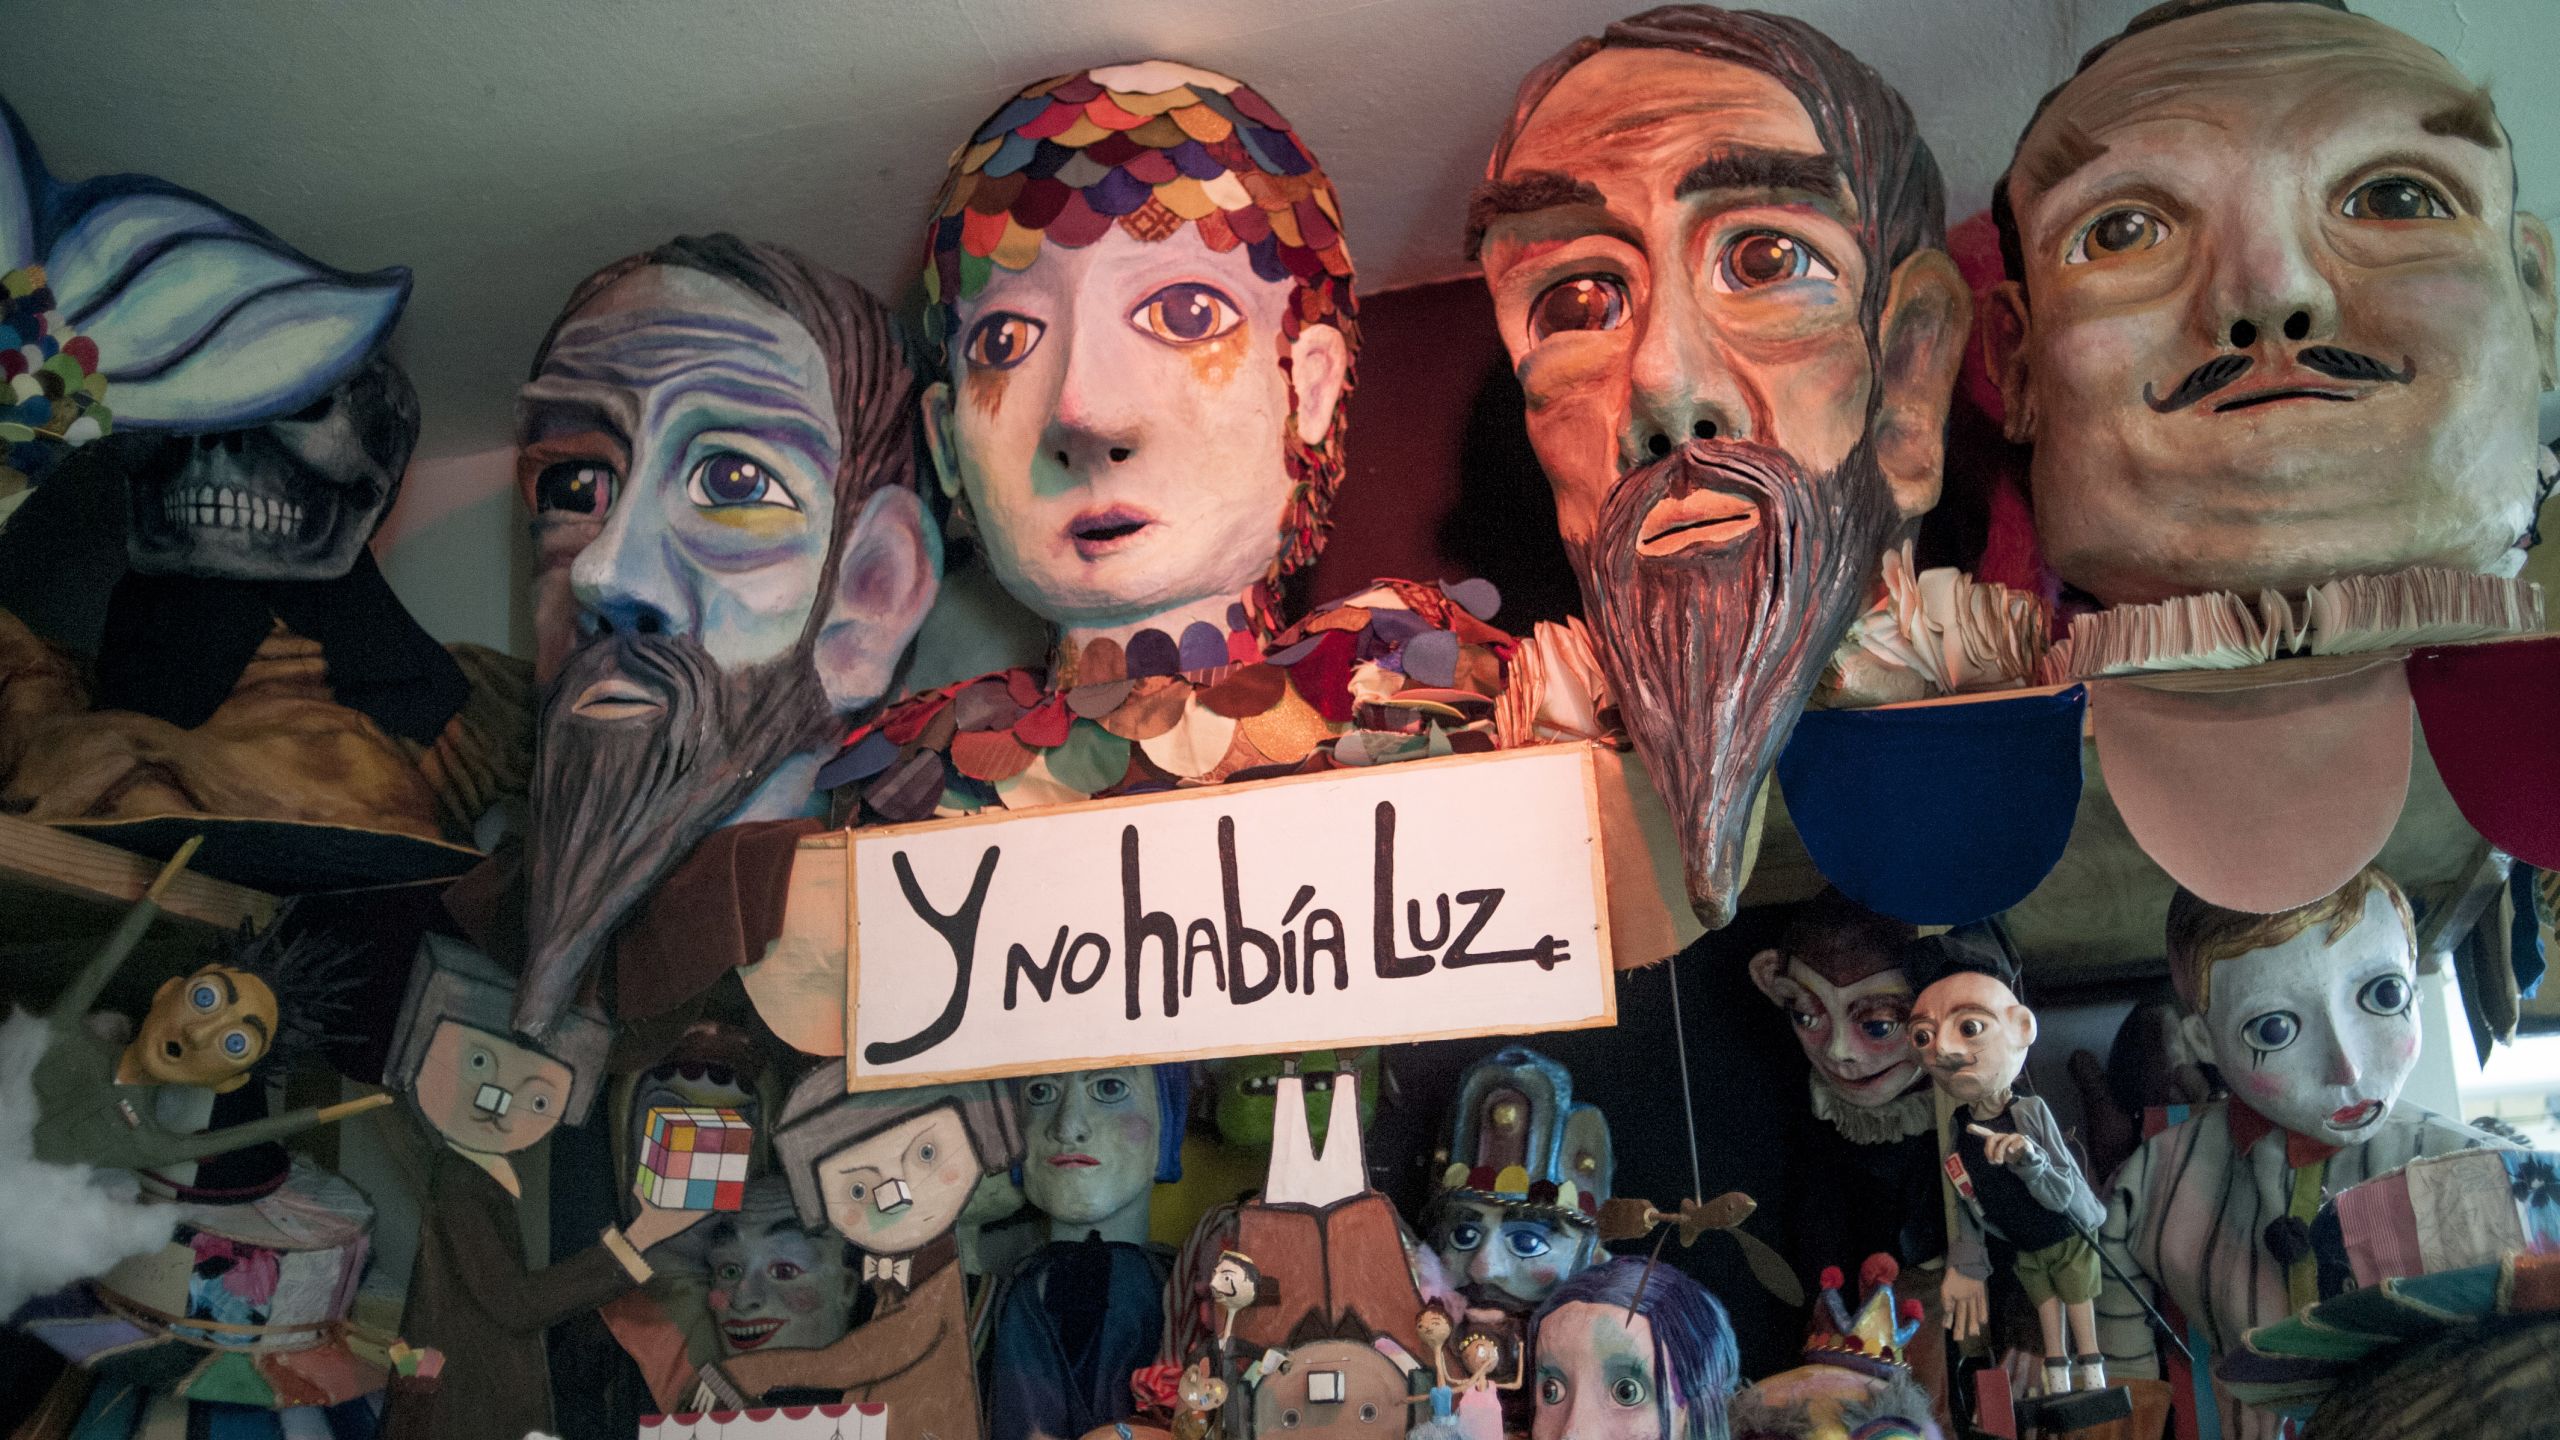 A collection of large puppet heads and smaller puppets.